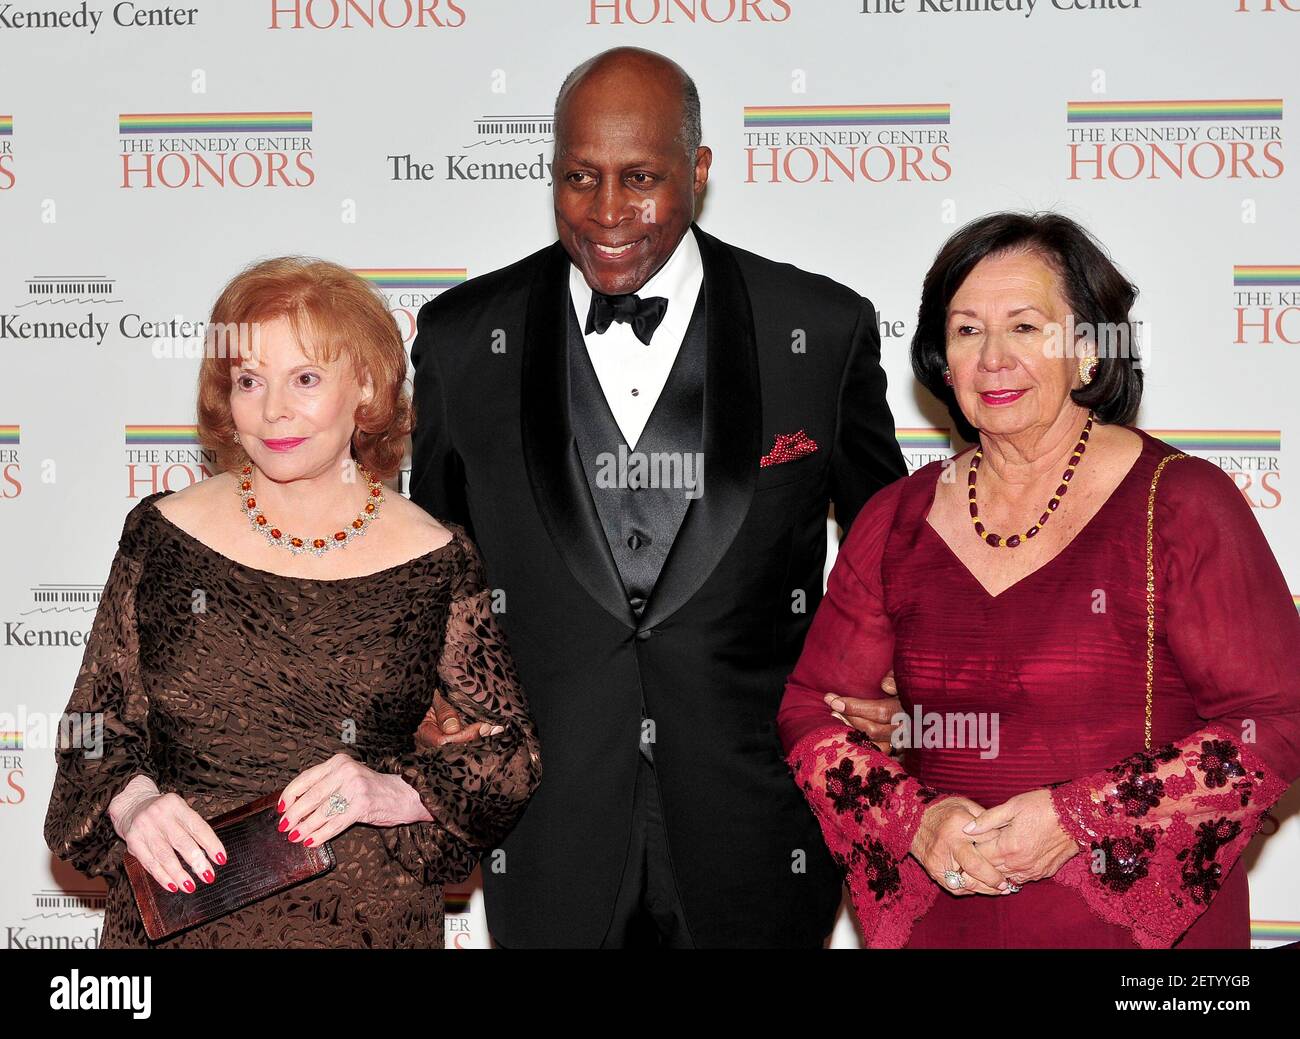 Washington, United States Of America. 04th Dec, 2010. Buffy Cafritz, Vernon Jordan and Anne Jordan arrive for the formal Artist's Dinner at the United States Department of State in Washington, DC on Saturday, December 4, 2010.Credit: Ron Sachs/CNP. | usage worldwide Credit: dpa/Alamy Live News Stock Photo